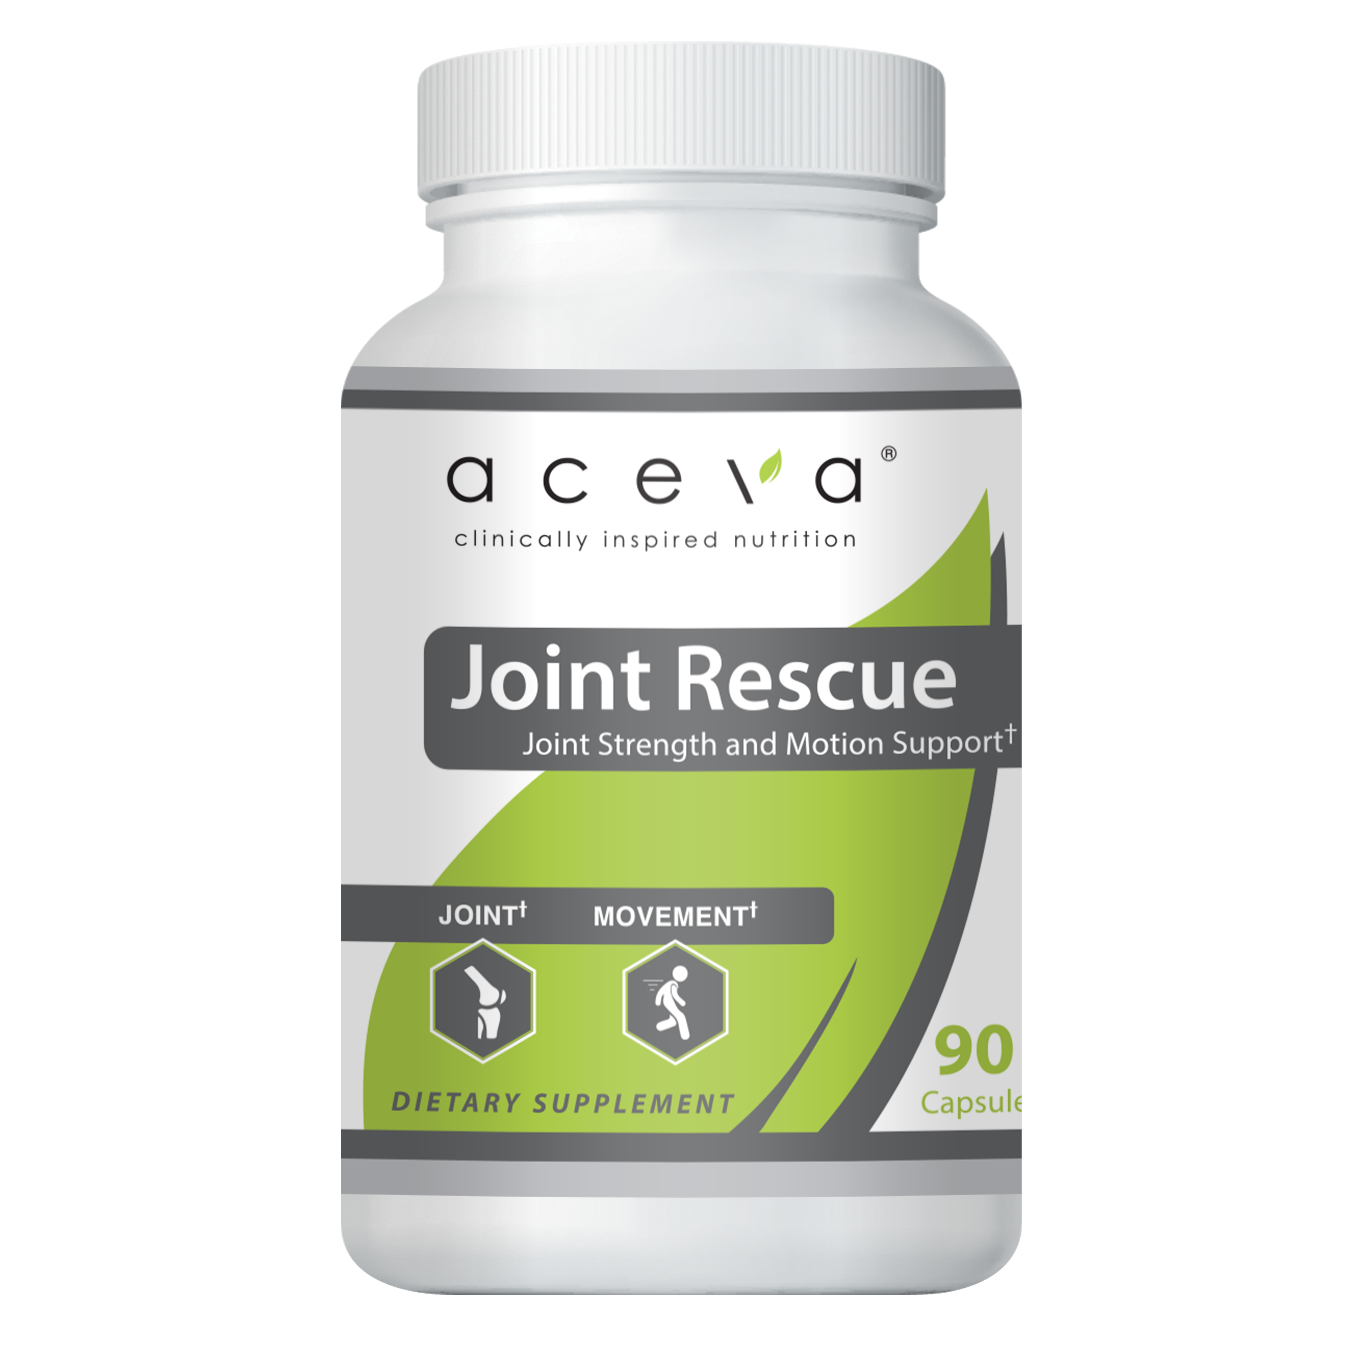 Joint Rescue